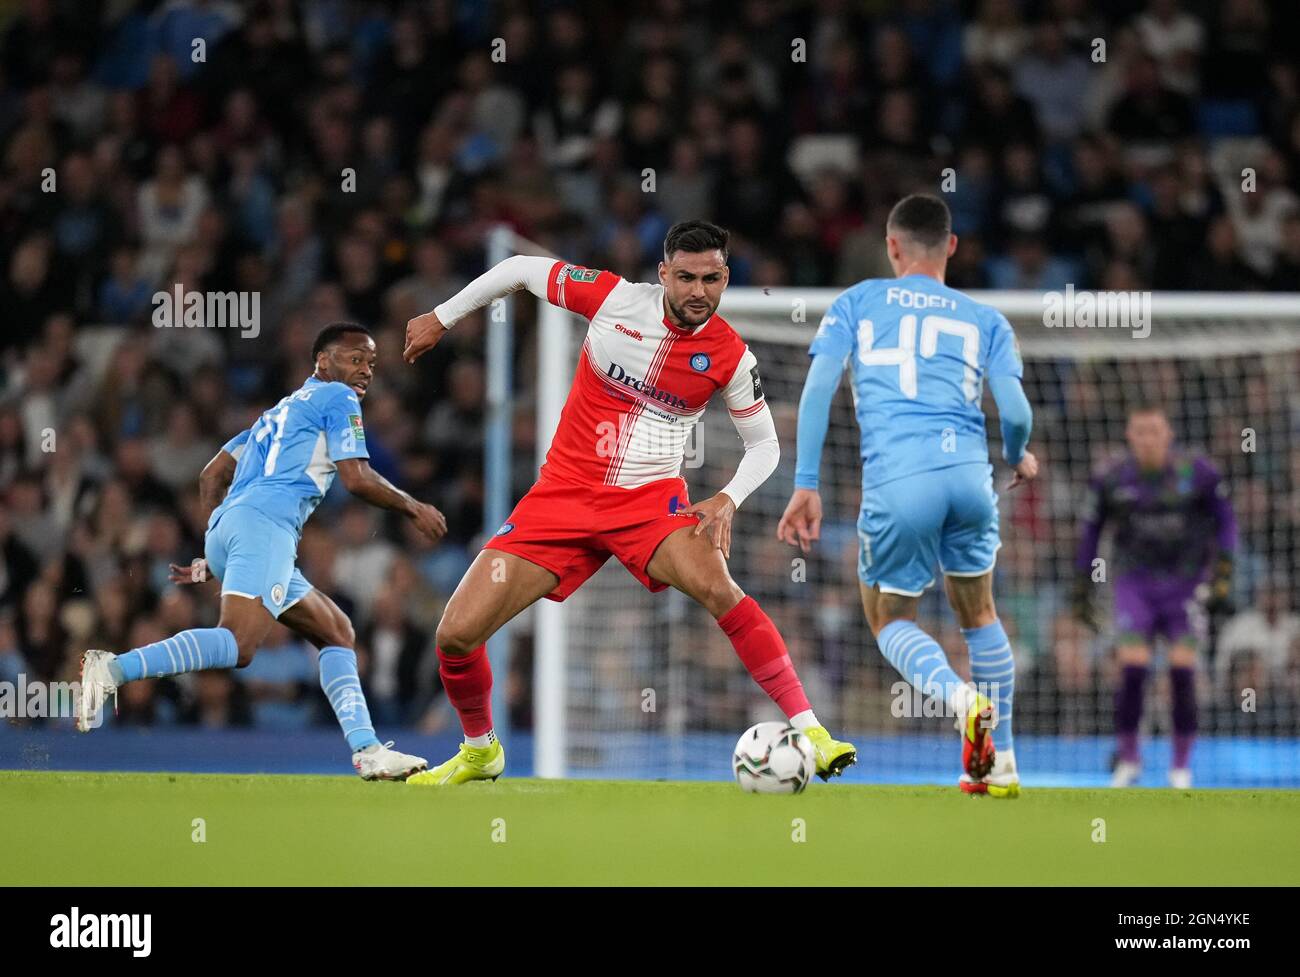 Manchester, UK. 21st Sep, 2021. Ryan Tafazolli of Wycombe Wanderers during the Carabao Cup match between Manchester City and Wycombe Wanderers at the Etihad Stadium, Manchester, England on 21 September 2021. Photo by Andy Rowland. Credit: PRiME Media Images/Alamy Live News Stock Photo